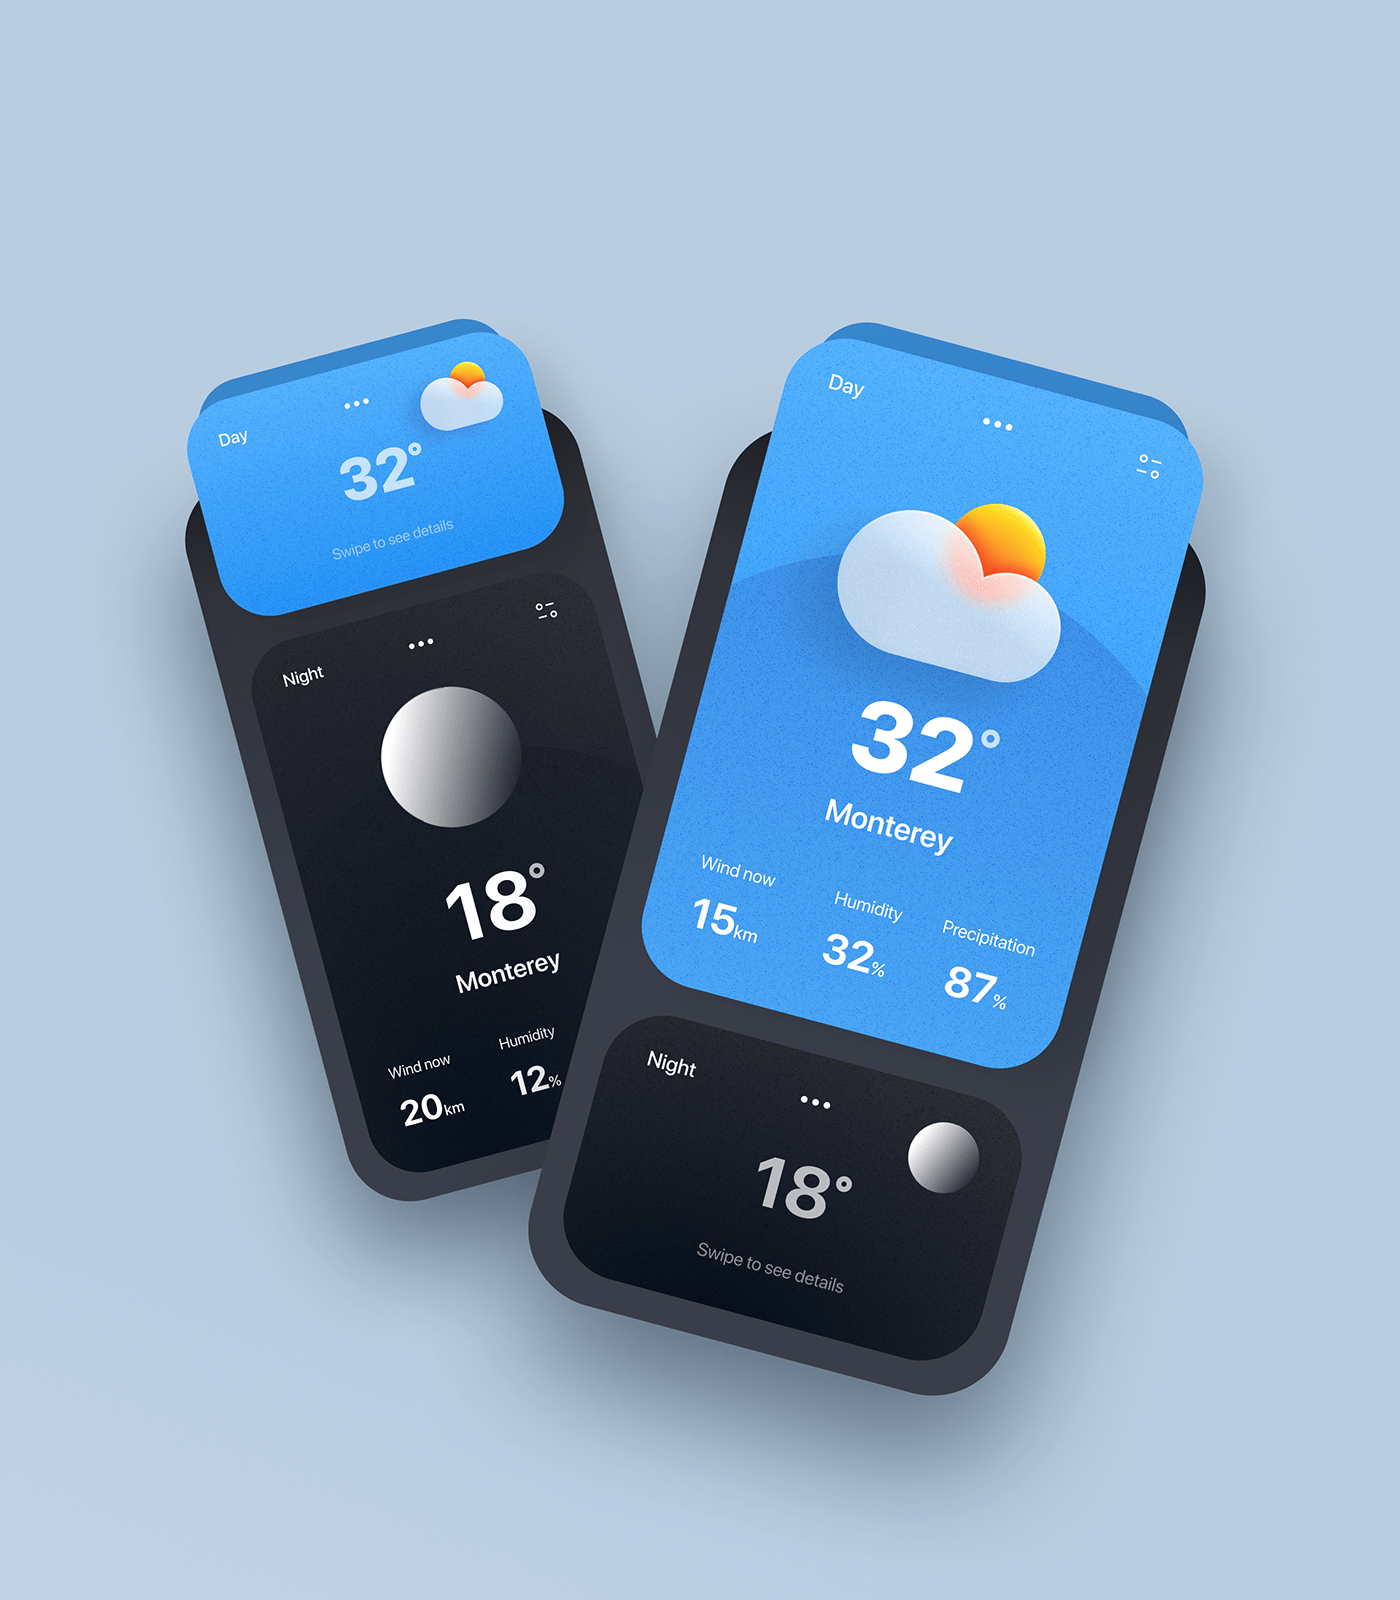 Icon mobile Mobile app Mobile UI summer top uiux weather Weather icon weather mobile